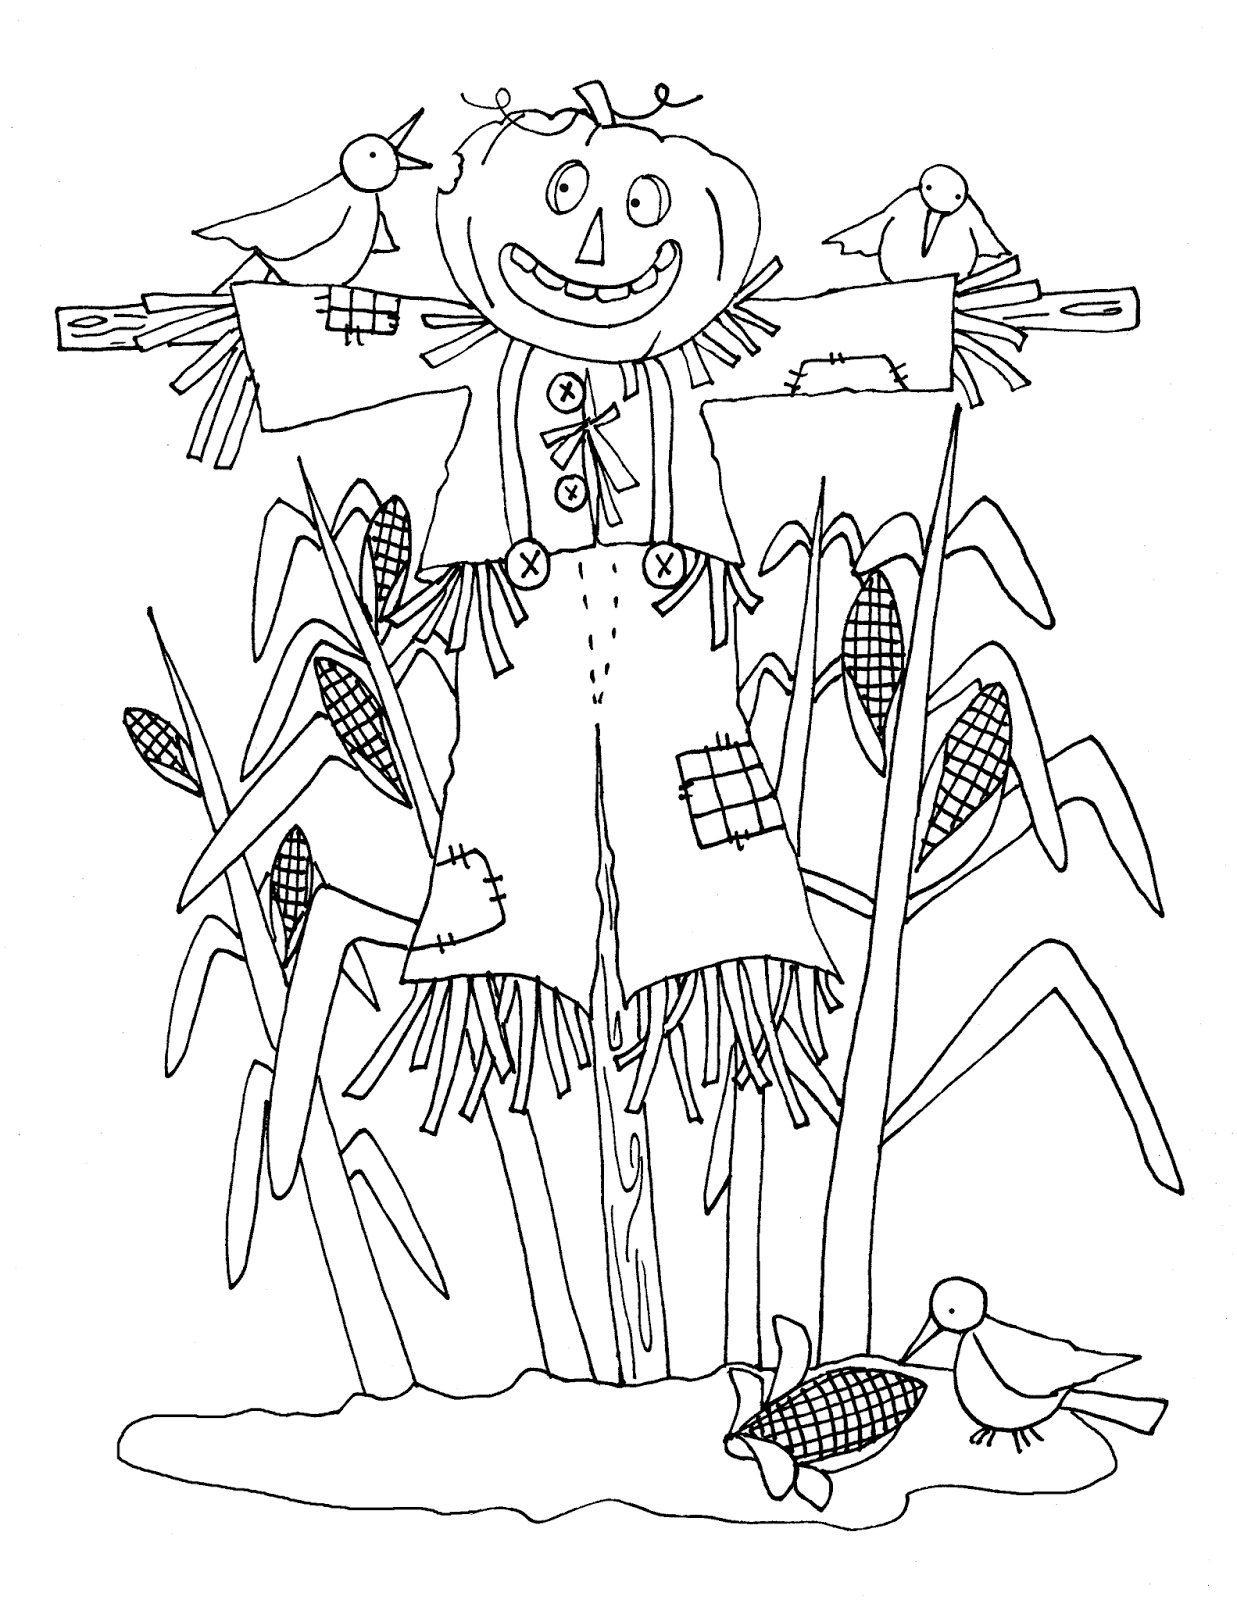 Free dearie dolls digi stamps cornfield scarecrow halloween coloring sheets unicorn coloring pages primitive embroidery patterns